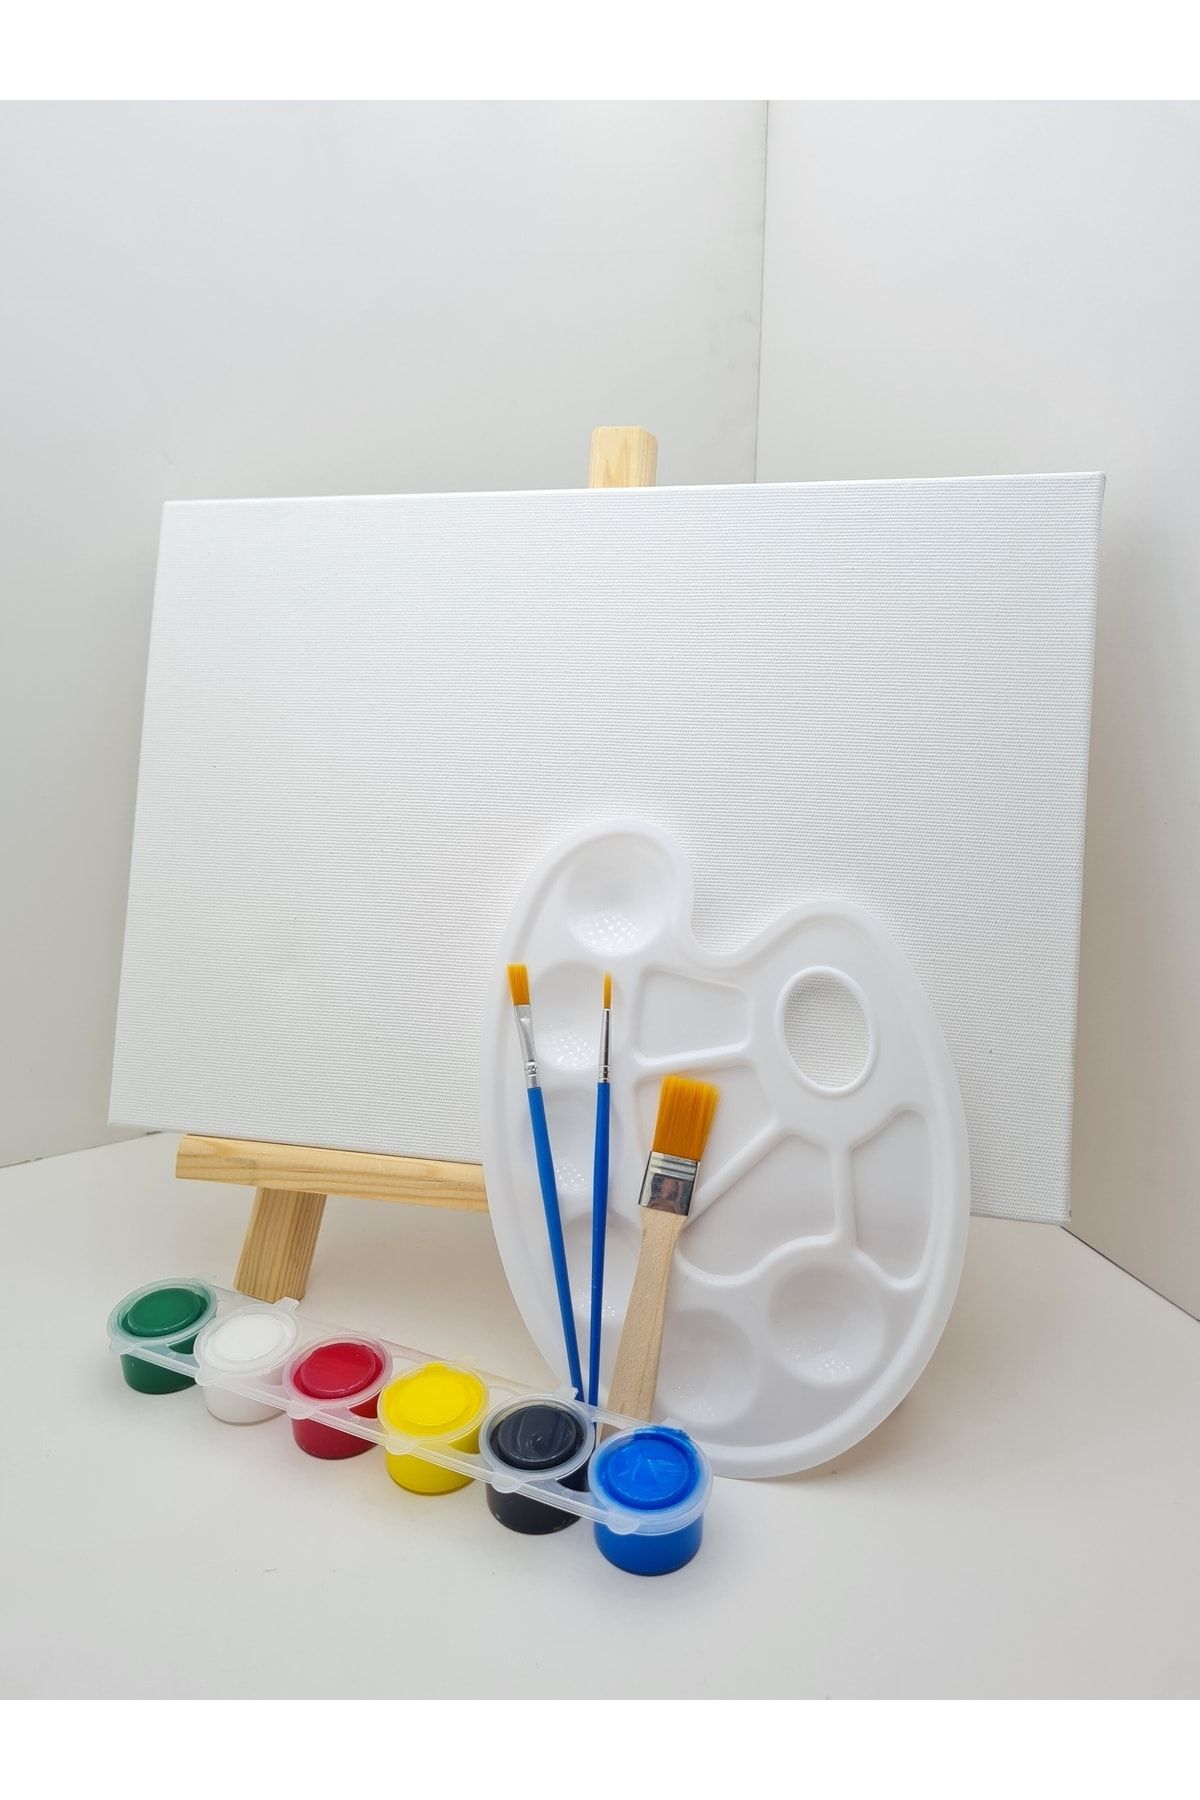 Gulcerenhobi Children's Acrylic Painting Canvas Set (Acrylic Paint, Brushes  and Easel)